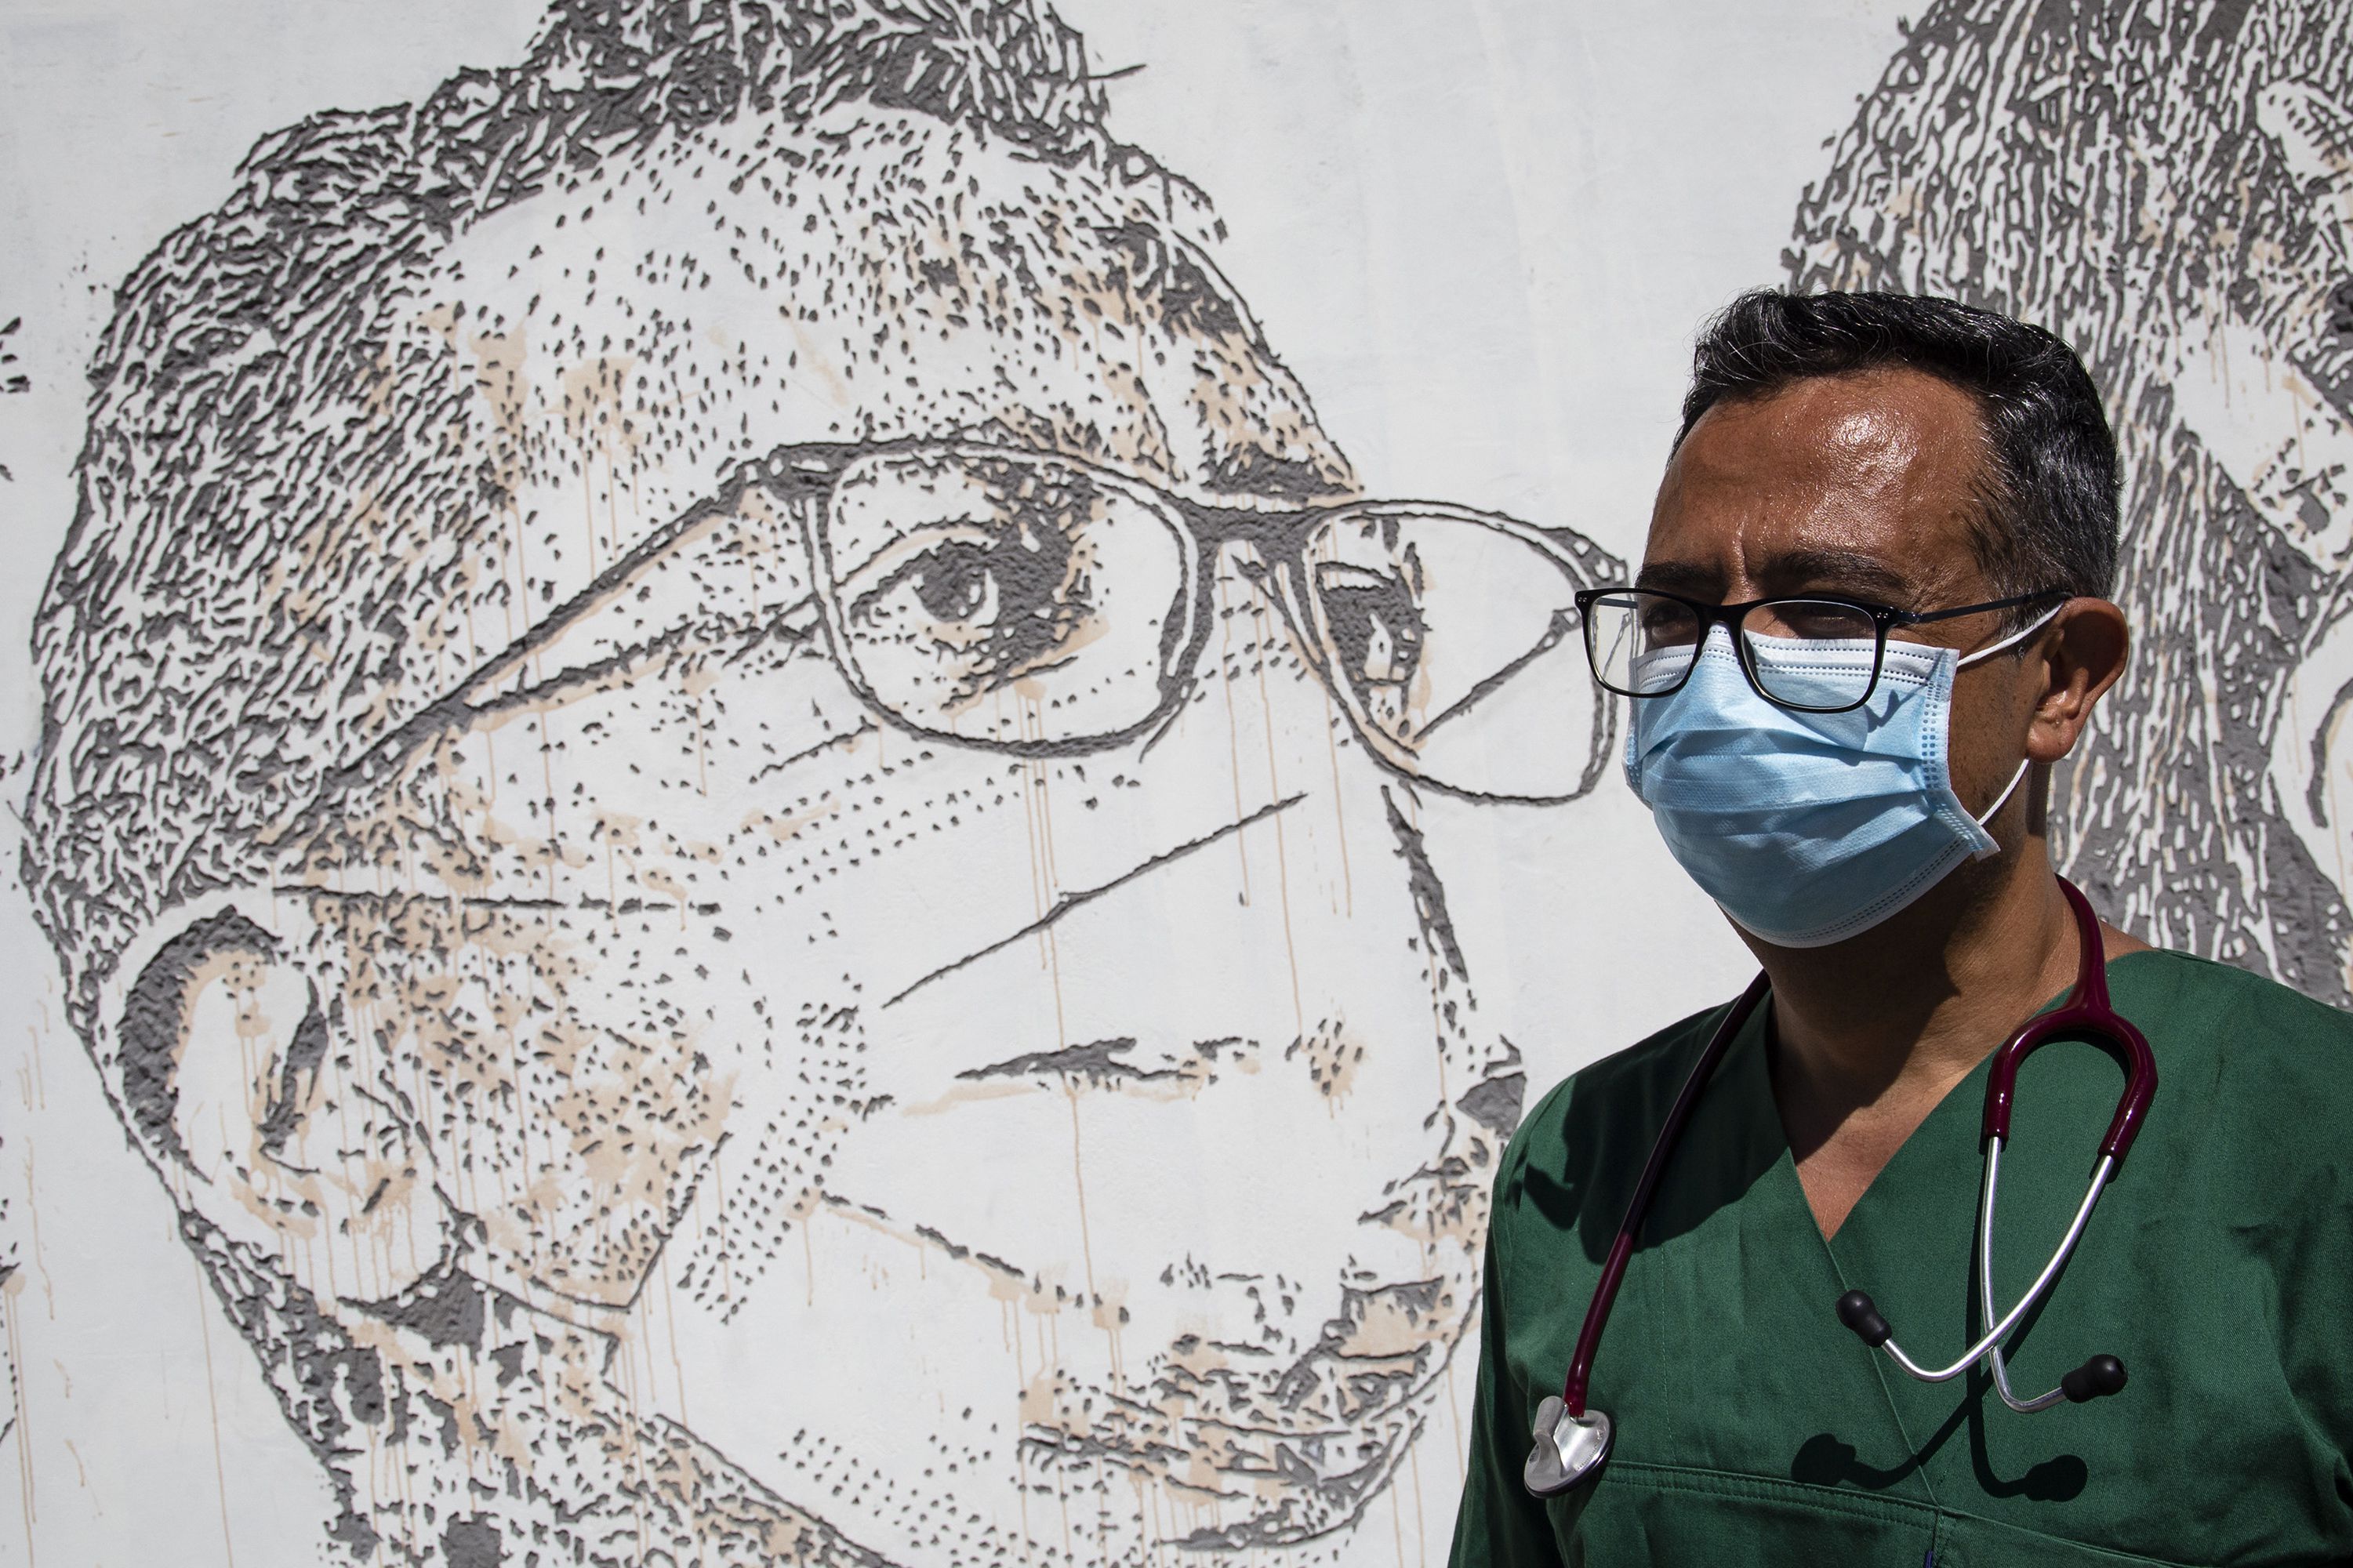 19/06/2020 19 June 2020, Portugal, Porto: Doctor David Andrade poses in front of a wall bearing his own portrait at Sao Joao hospital during the inauguration of an artwork by Portuguese artist Alexandre Farto in honour of health professionals battling the Coronavirus (covid-19) pandemic. Photo: Rita Franca/SOPA Images via ZUMA Wire/dpa POLITICA INTERNACIONAL Rita Franca/SOPA Images via ZUMA / DPA 